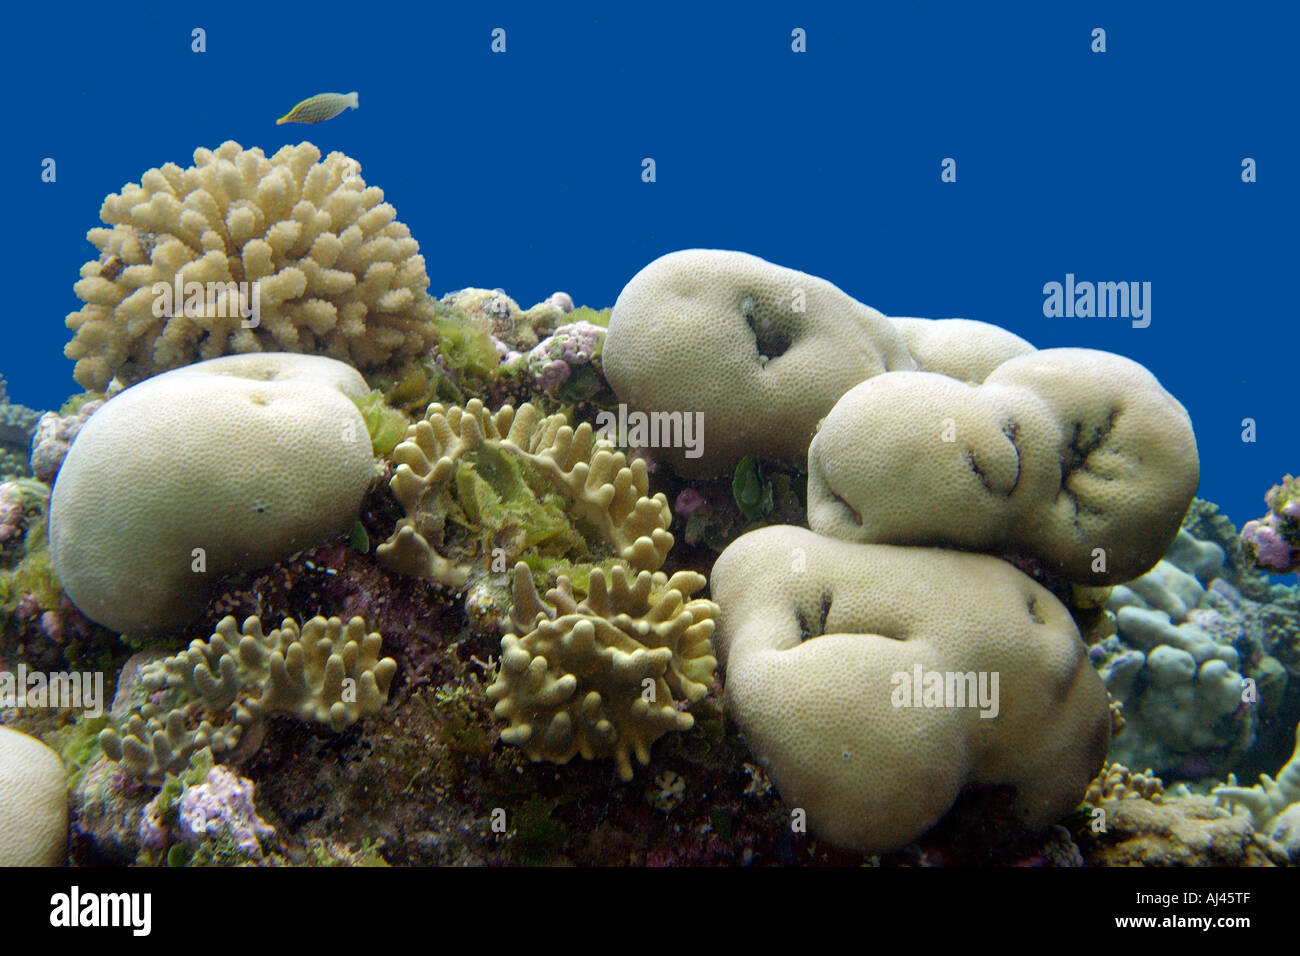 Corals compete for space including Porites sp Lobophytum sp and Acropora sp Ailuk atoll Marshall Islands Pacific Stock Photo